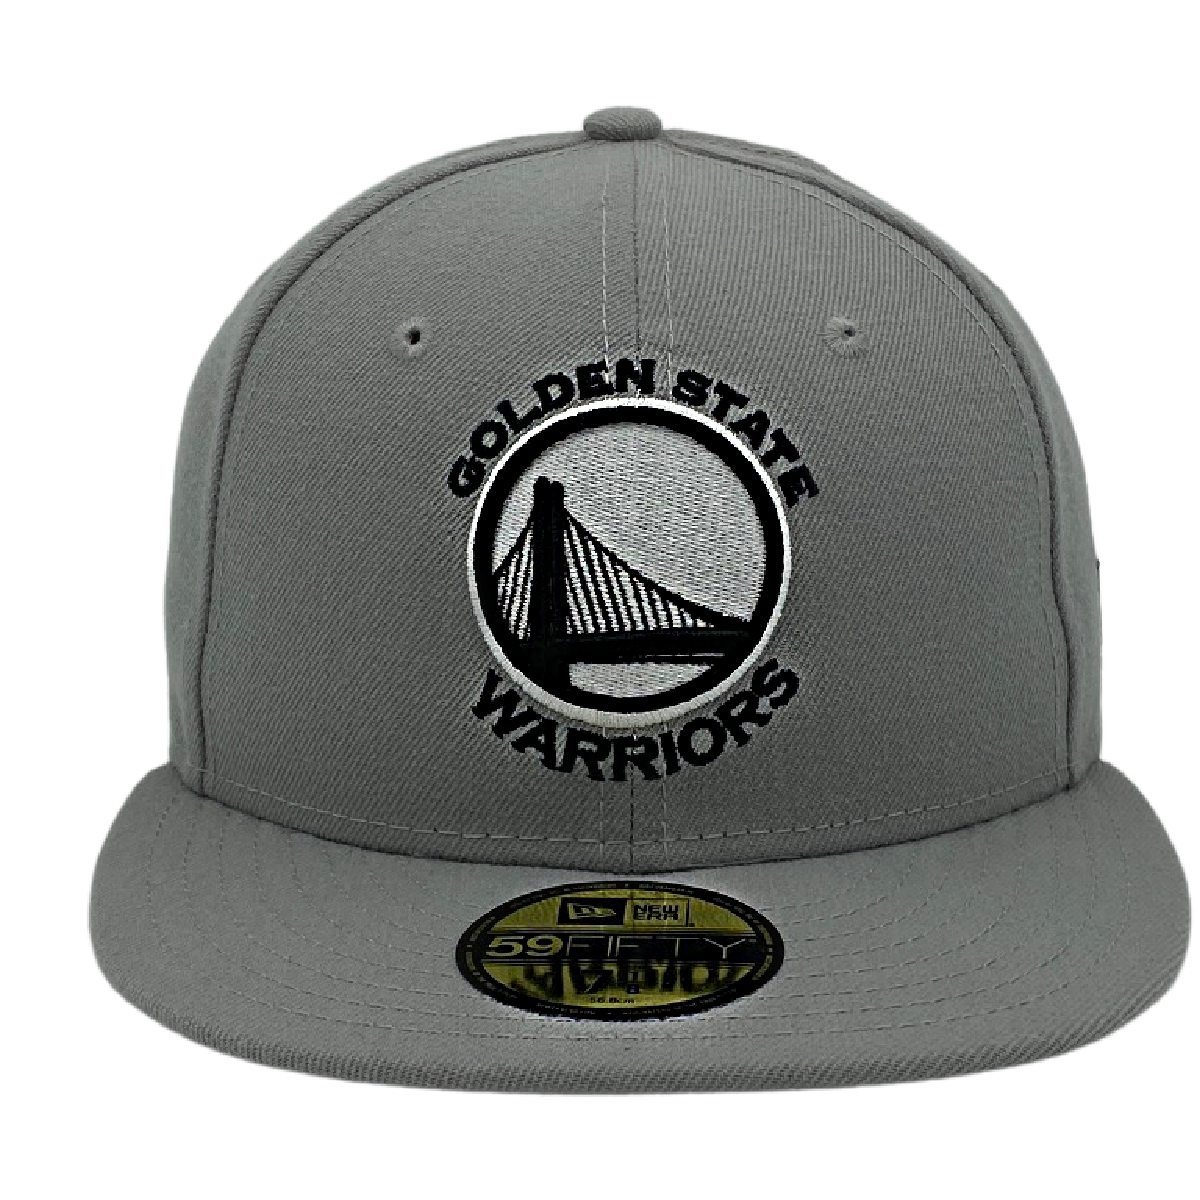 GOLDEN STATE WARRIORS NEW ERA 59FIFTY HAT-GREY/WHITE Nvsoccer.com Thecoliseum